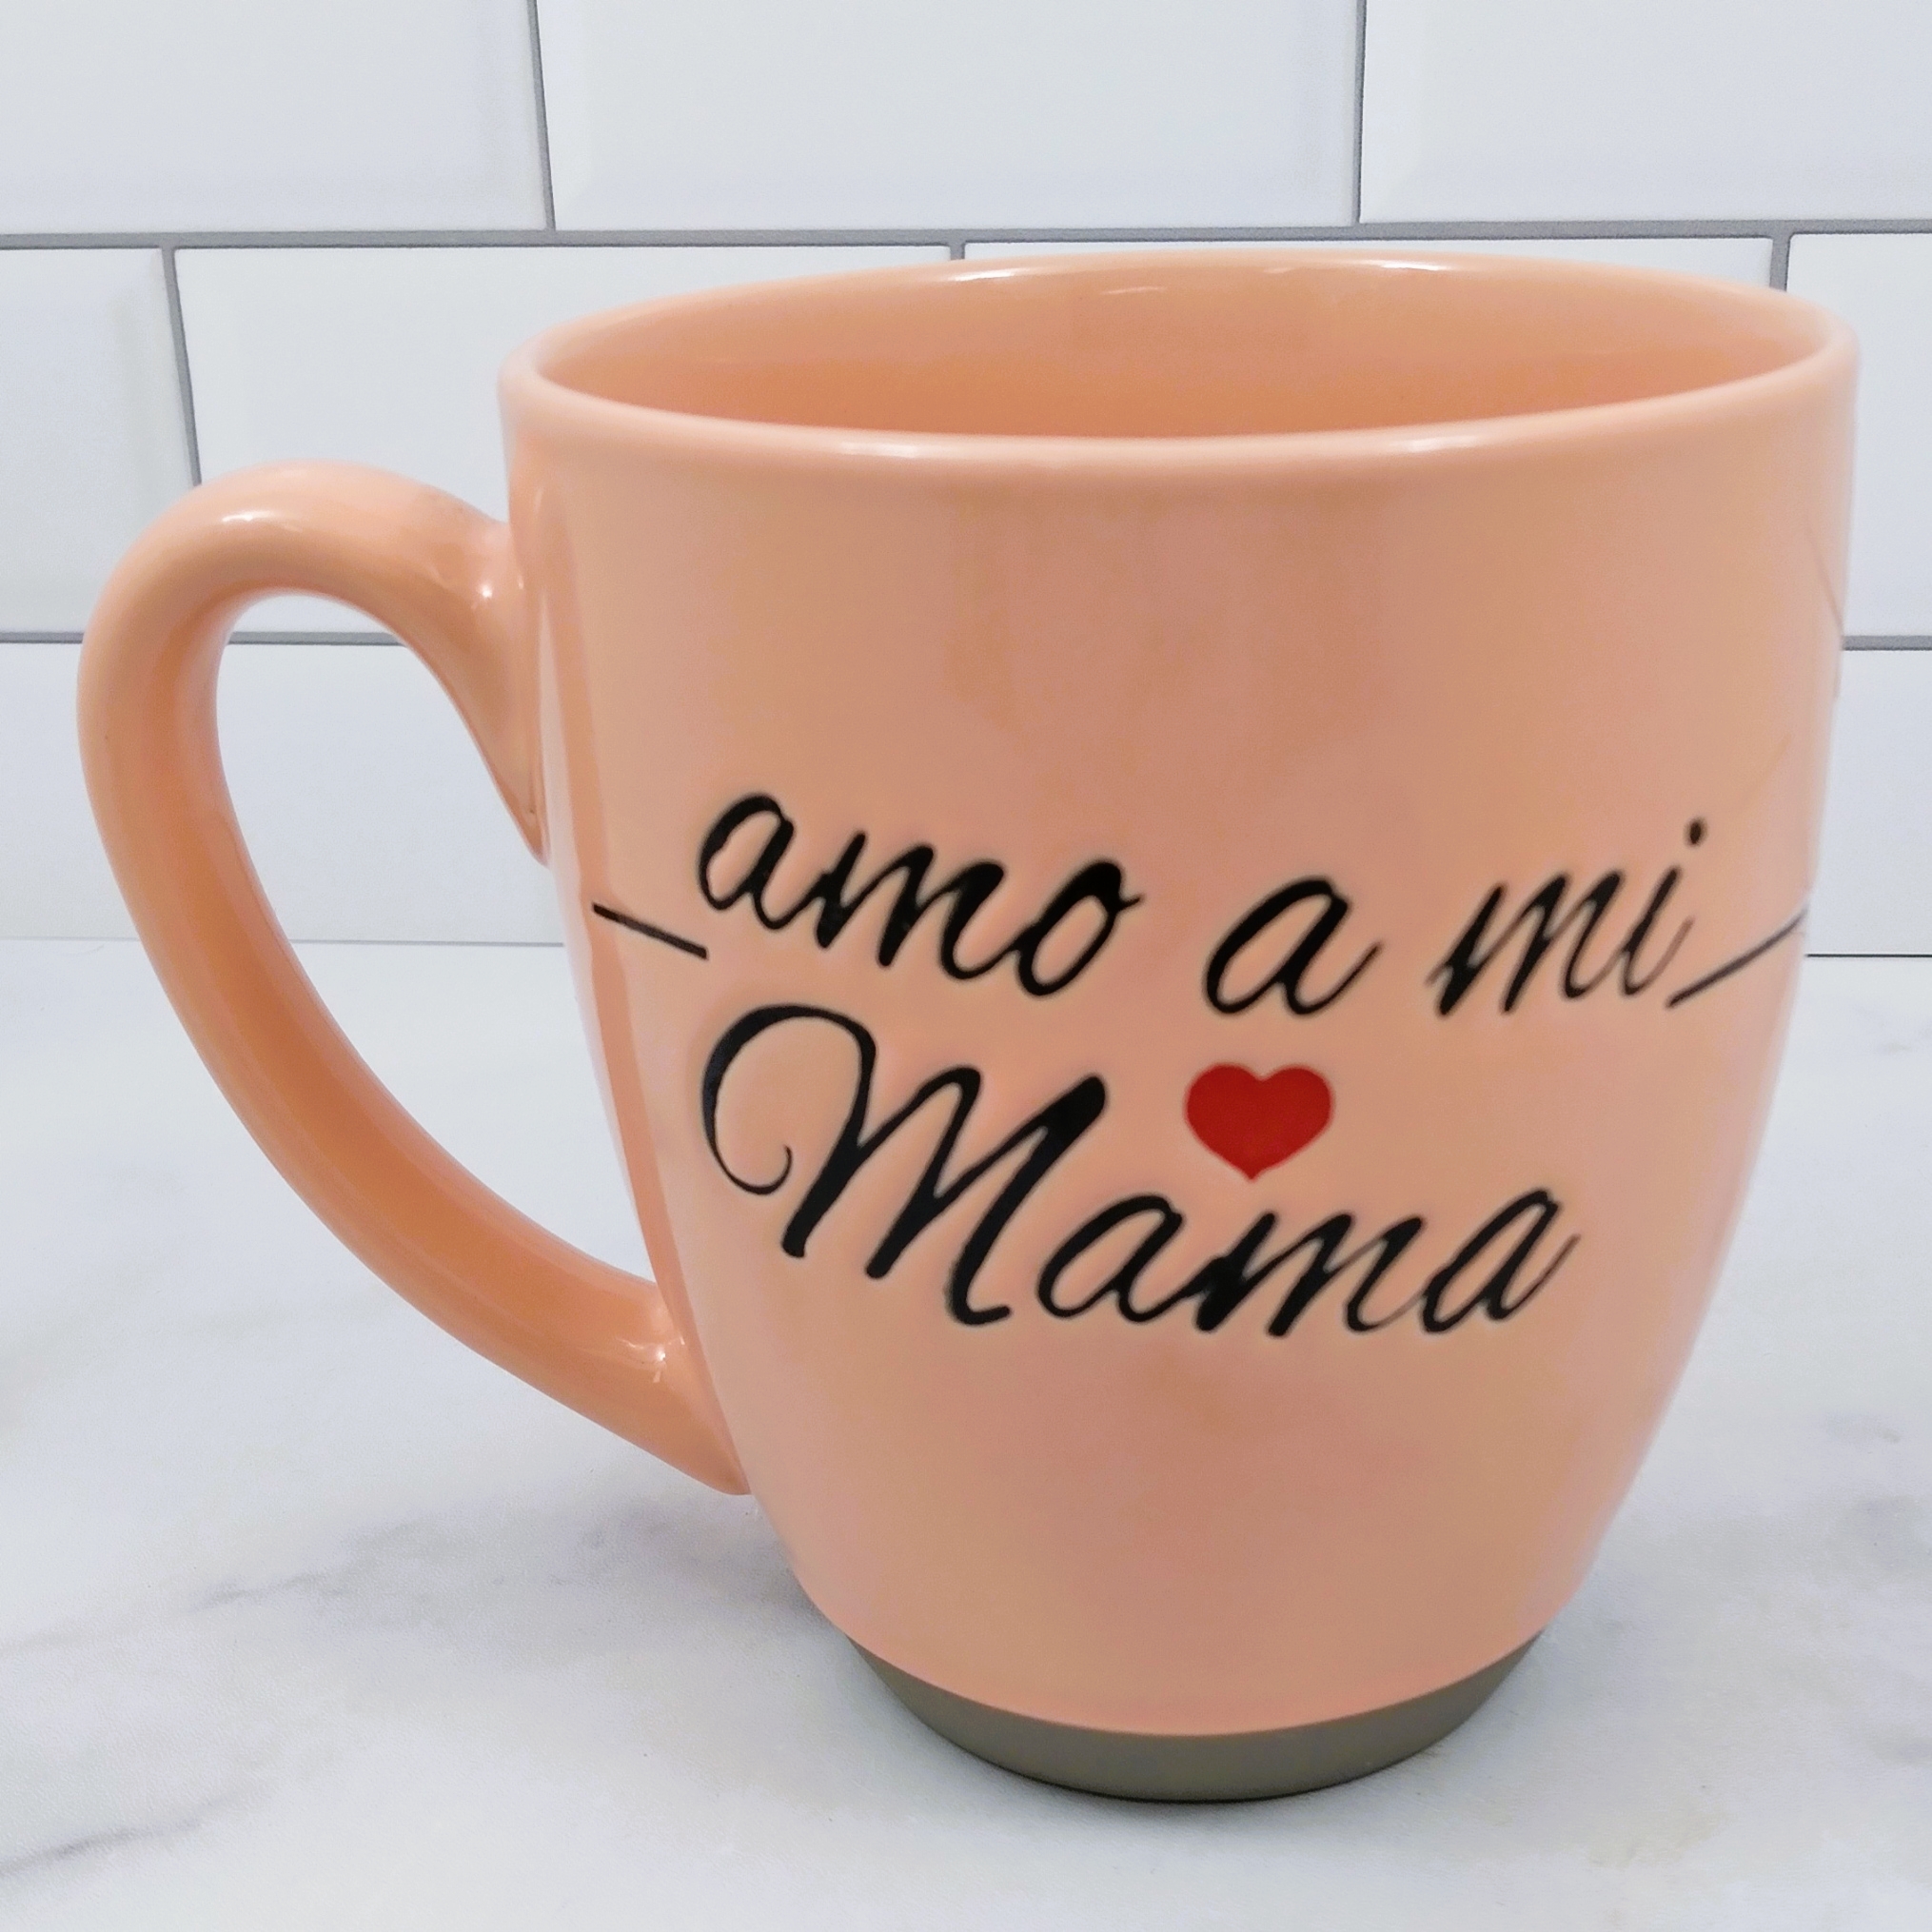 This I Heart Mom Spanish Coffee Mug Ceramic Beverage Tea Cup 17oz 500ml by Blue Sky is made with love by Premier Homegoods! Shop more unique gift ideas today with Spots Initiatives, the best way to support creators.